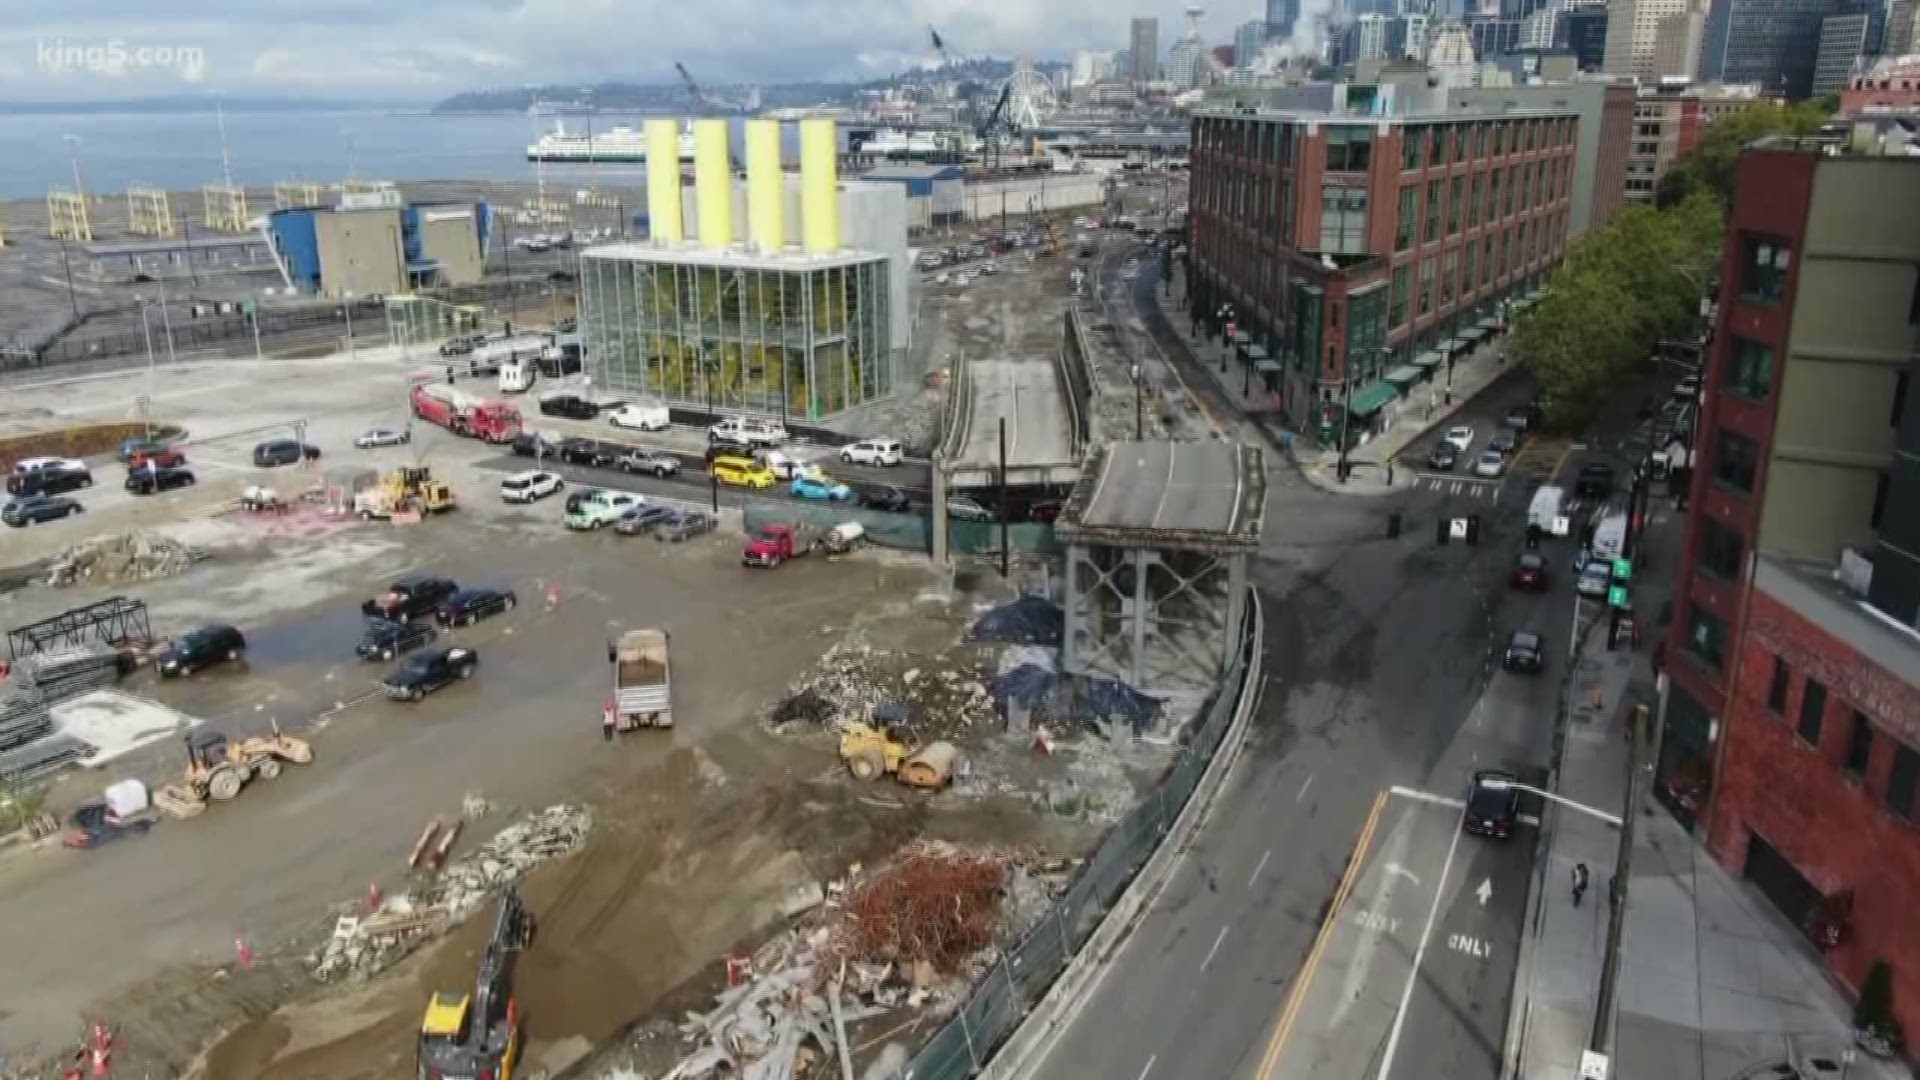 The Alaskan Way Viaduct is nearly 92% demolished, and in order to finish the work, some roads will be temporarily closed.